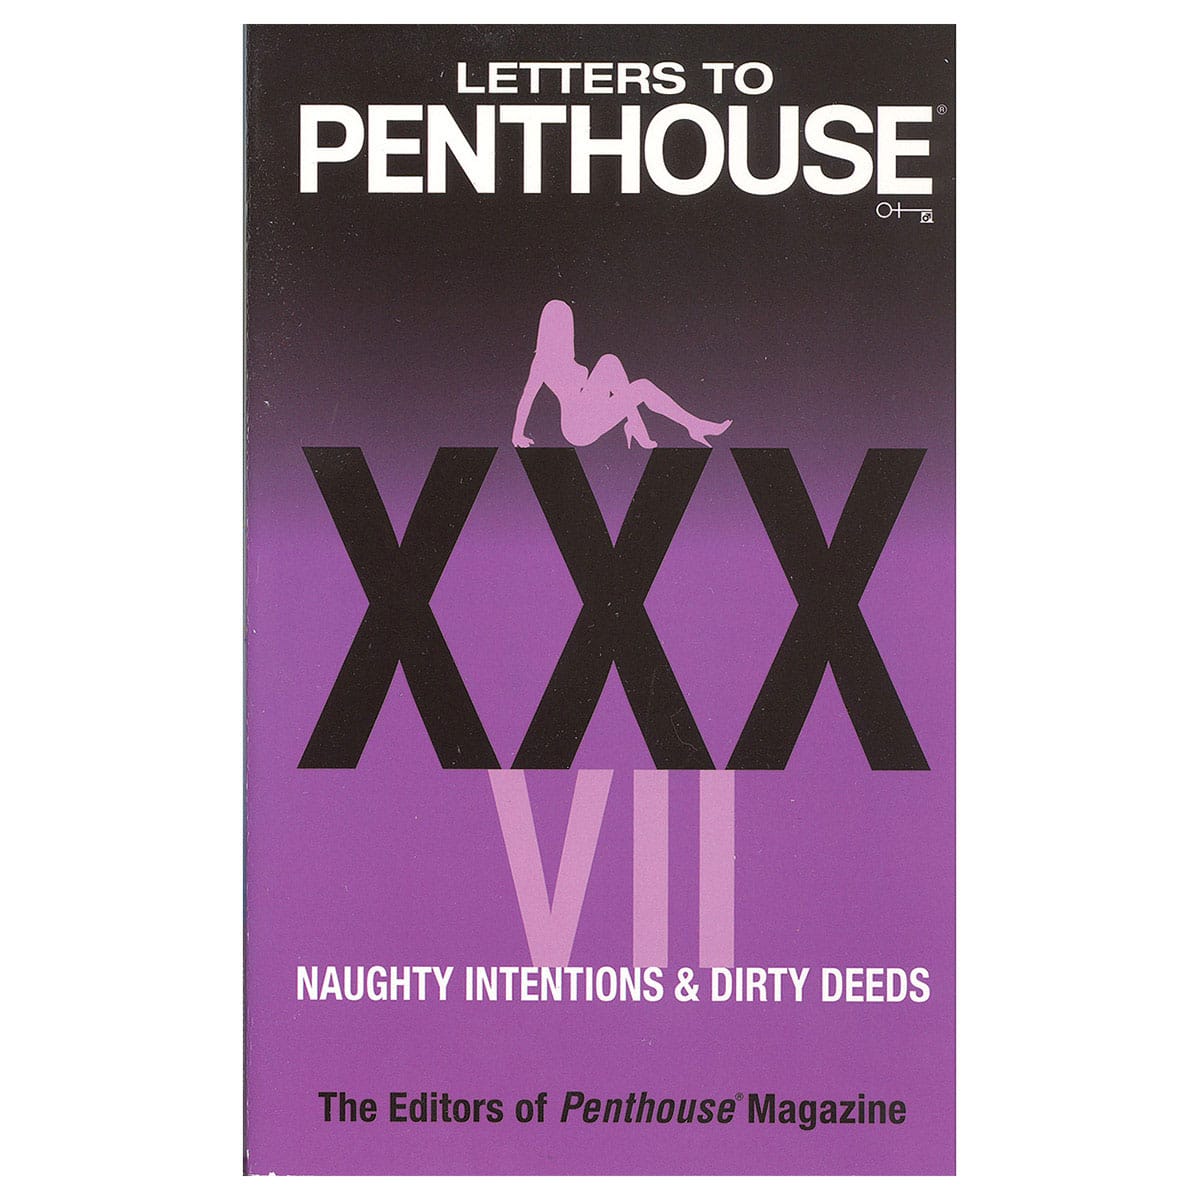 Buy Naughty Intentions   and  Dirty Deeds Letters to Penthouse XXXVII book for her.